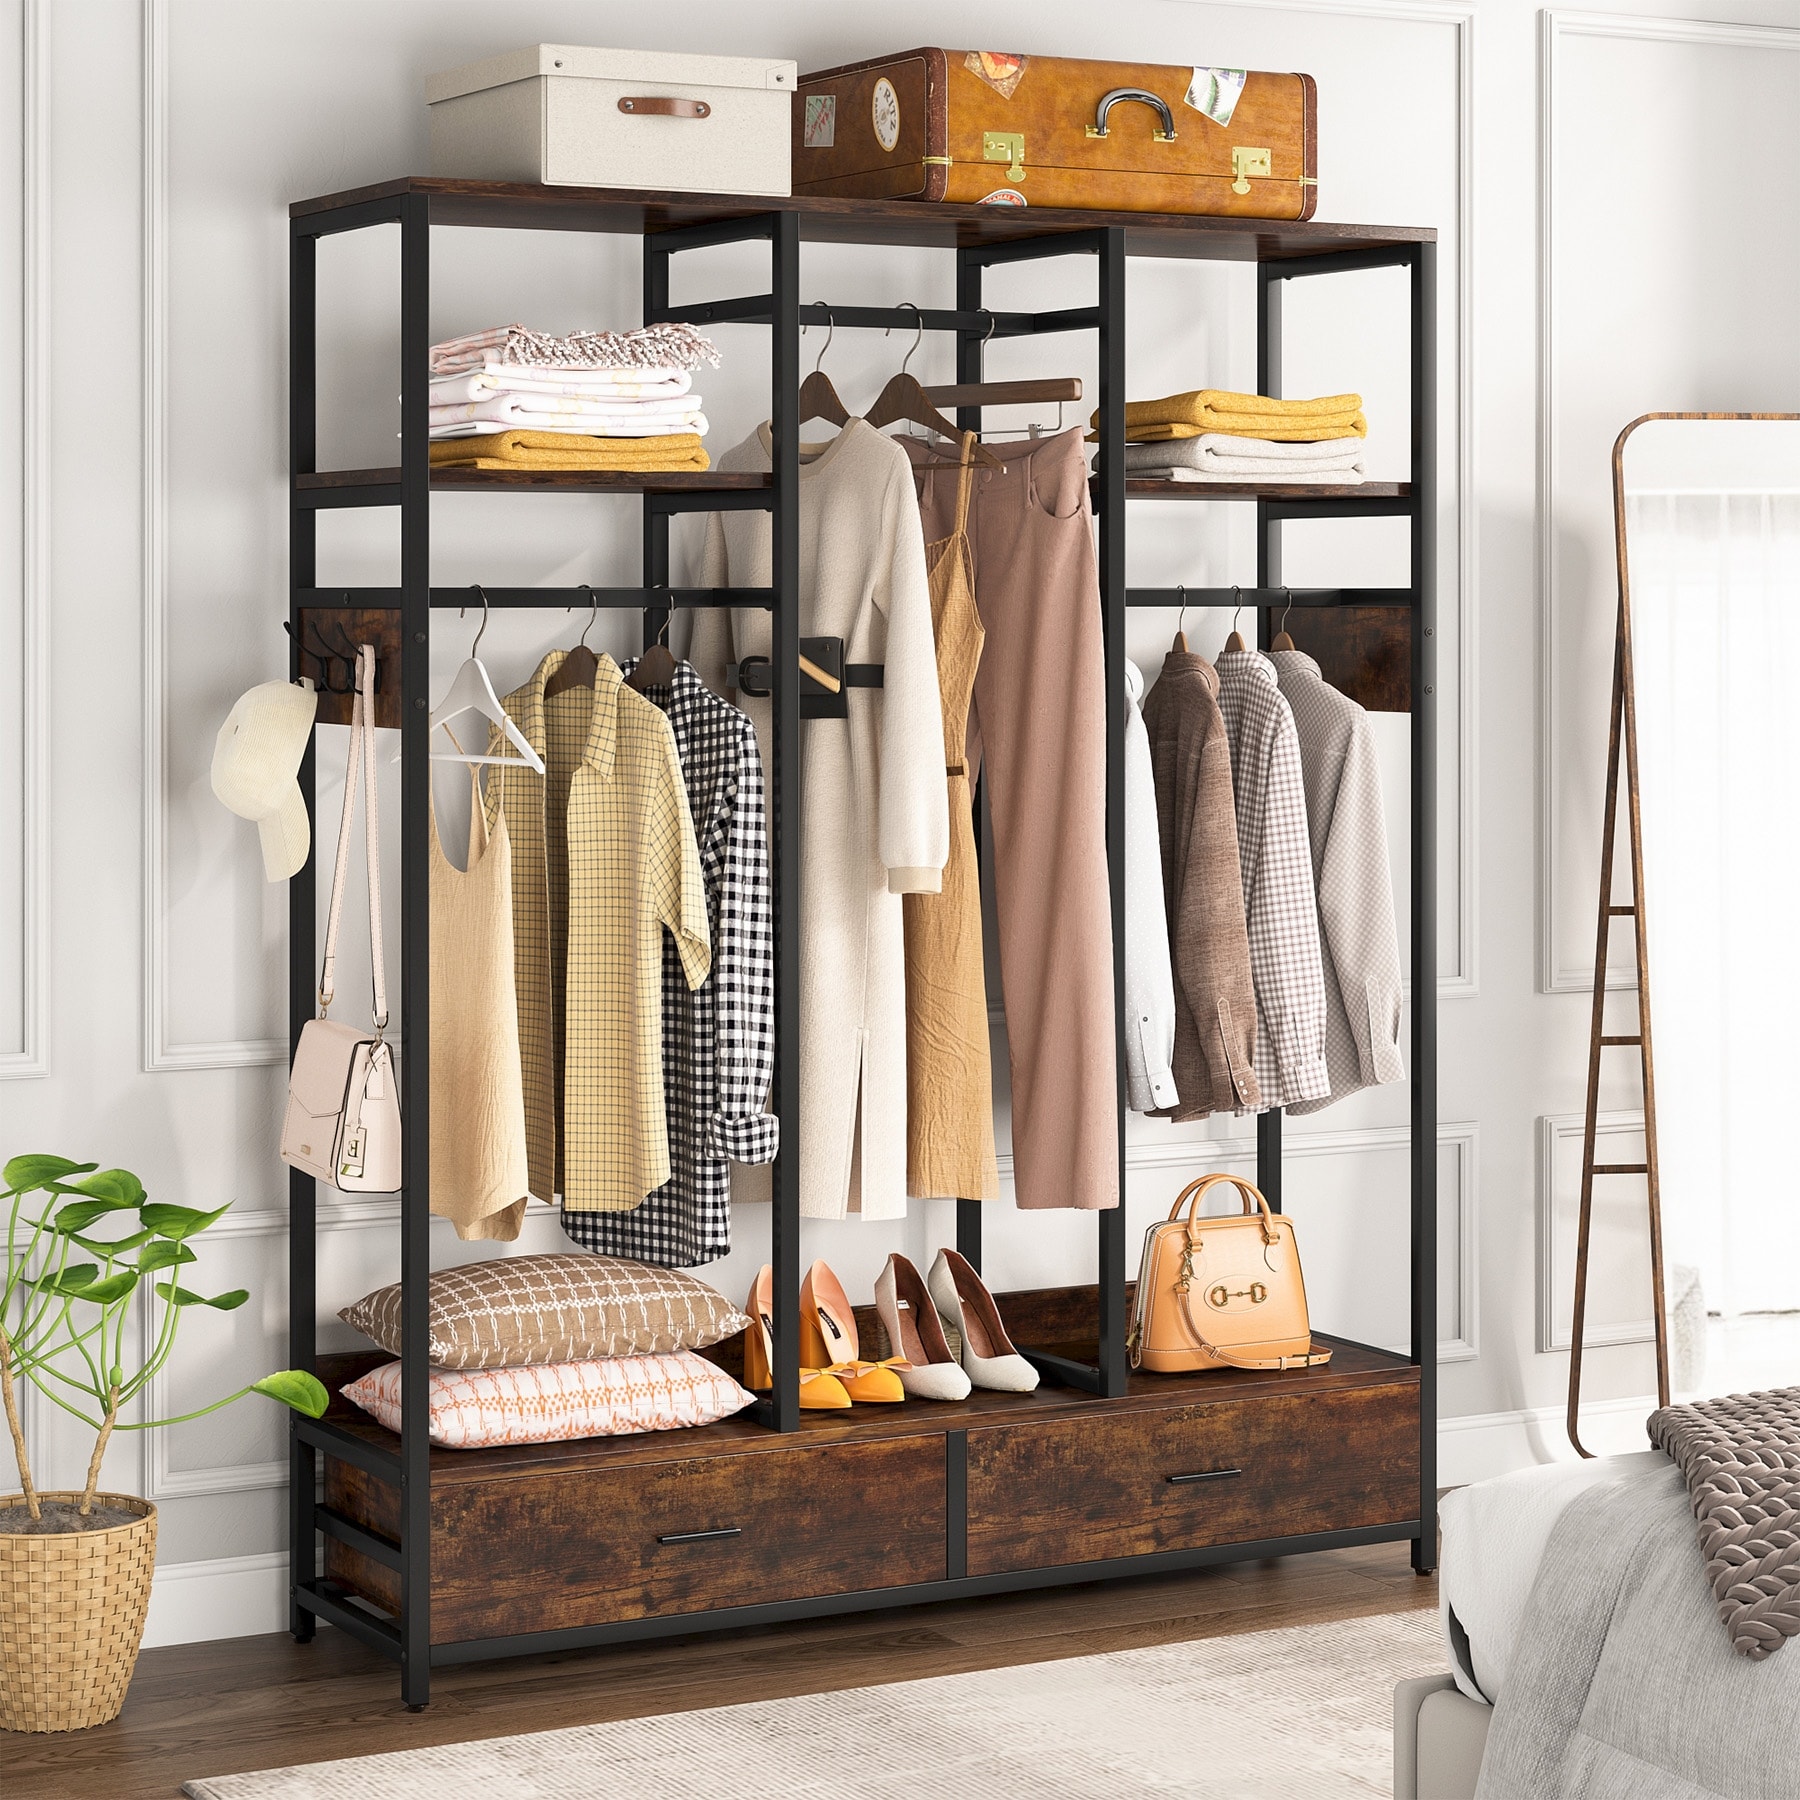 https://ak1.ostkcdn.com/images/products/is/images/direct/c5222cab551e4dd042efab7049b49e8c7517dacc/Freestanding-Closet-Organizer-with-Drawers-and-Hanging-Rod-Clothes-Garment-Rack-Organizer.jpg